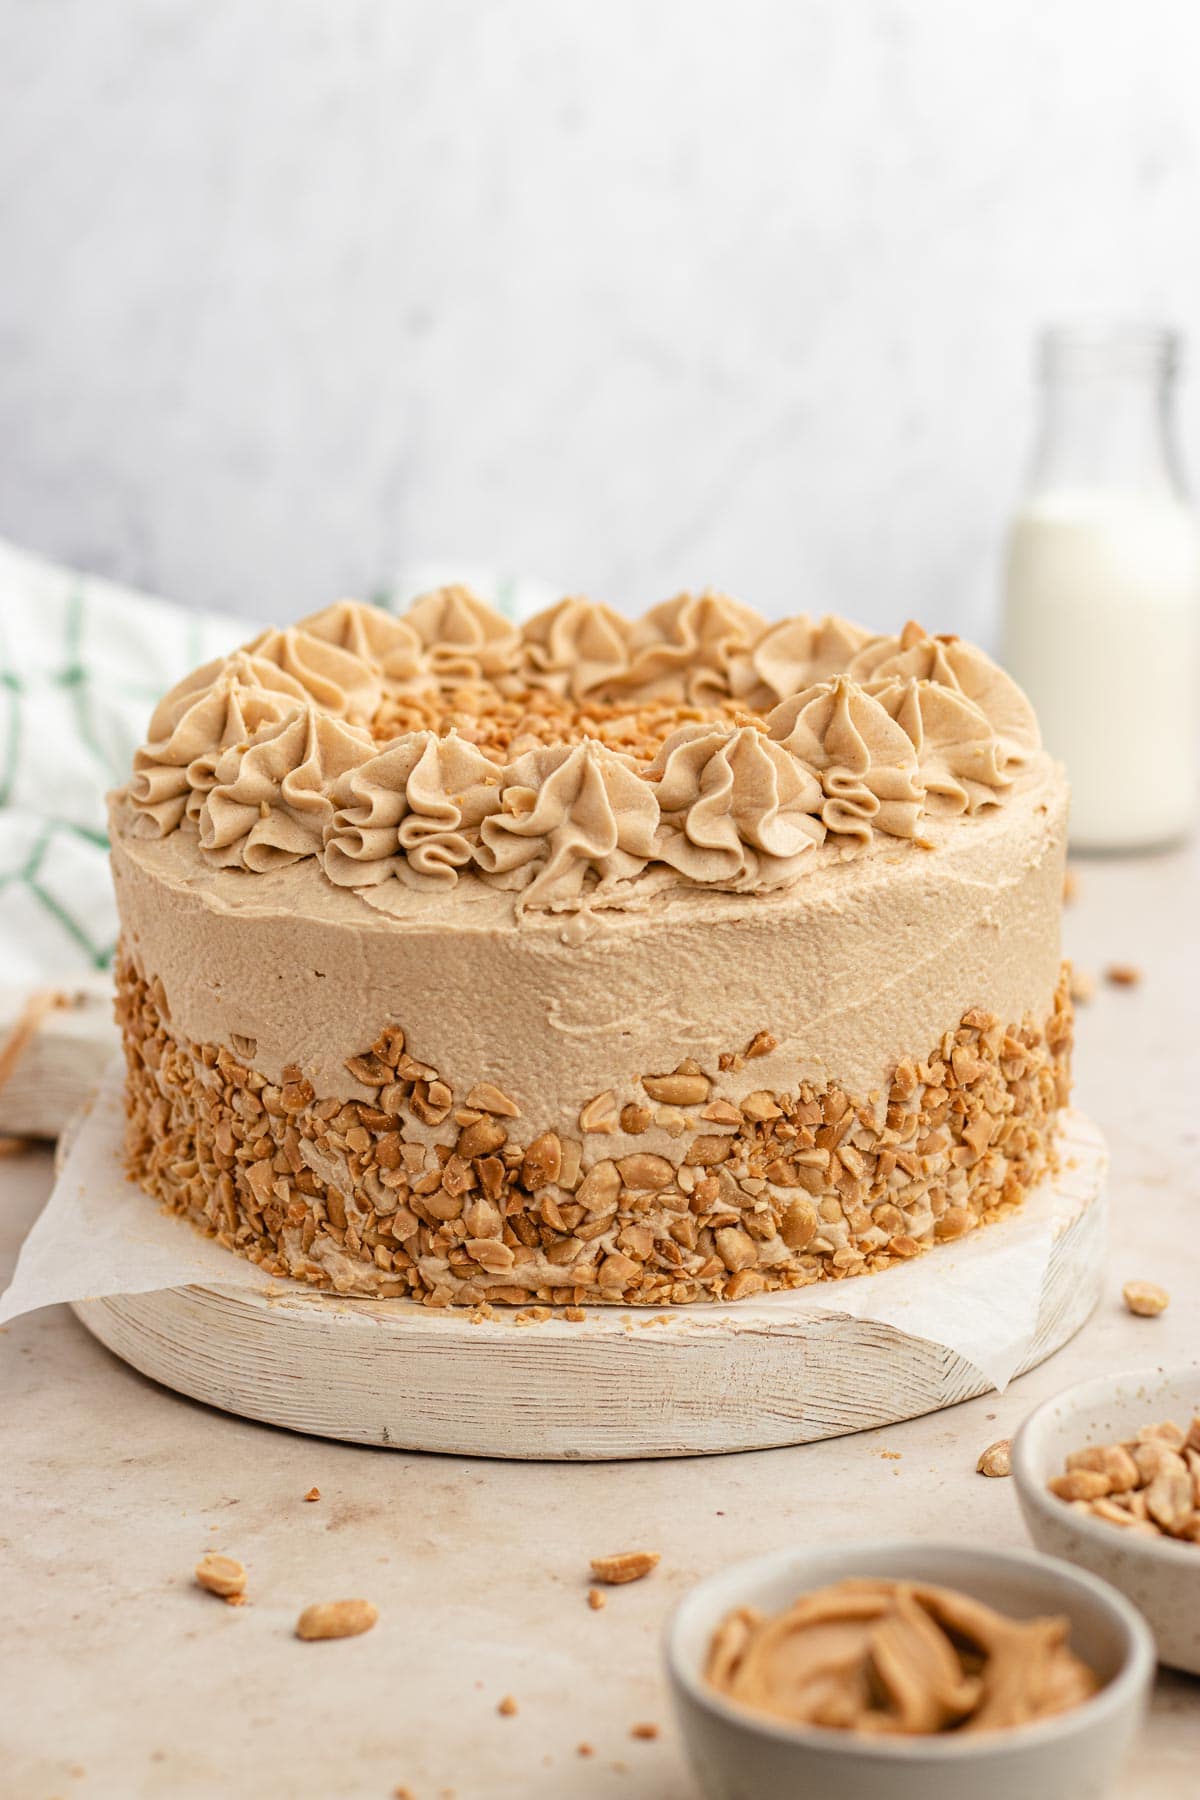 Peanut Butter Layer Cake all decorated